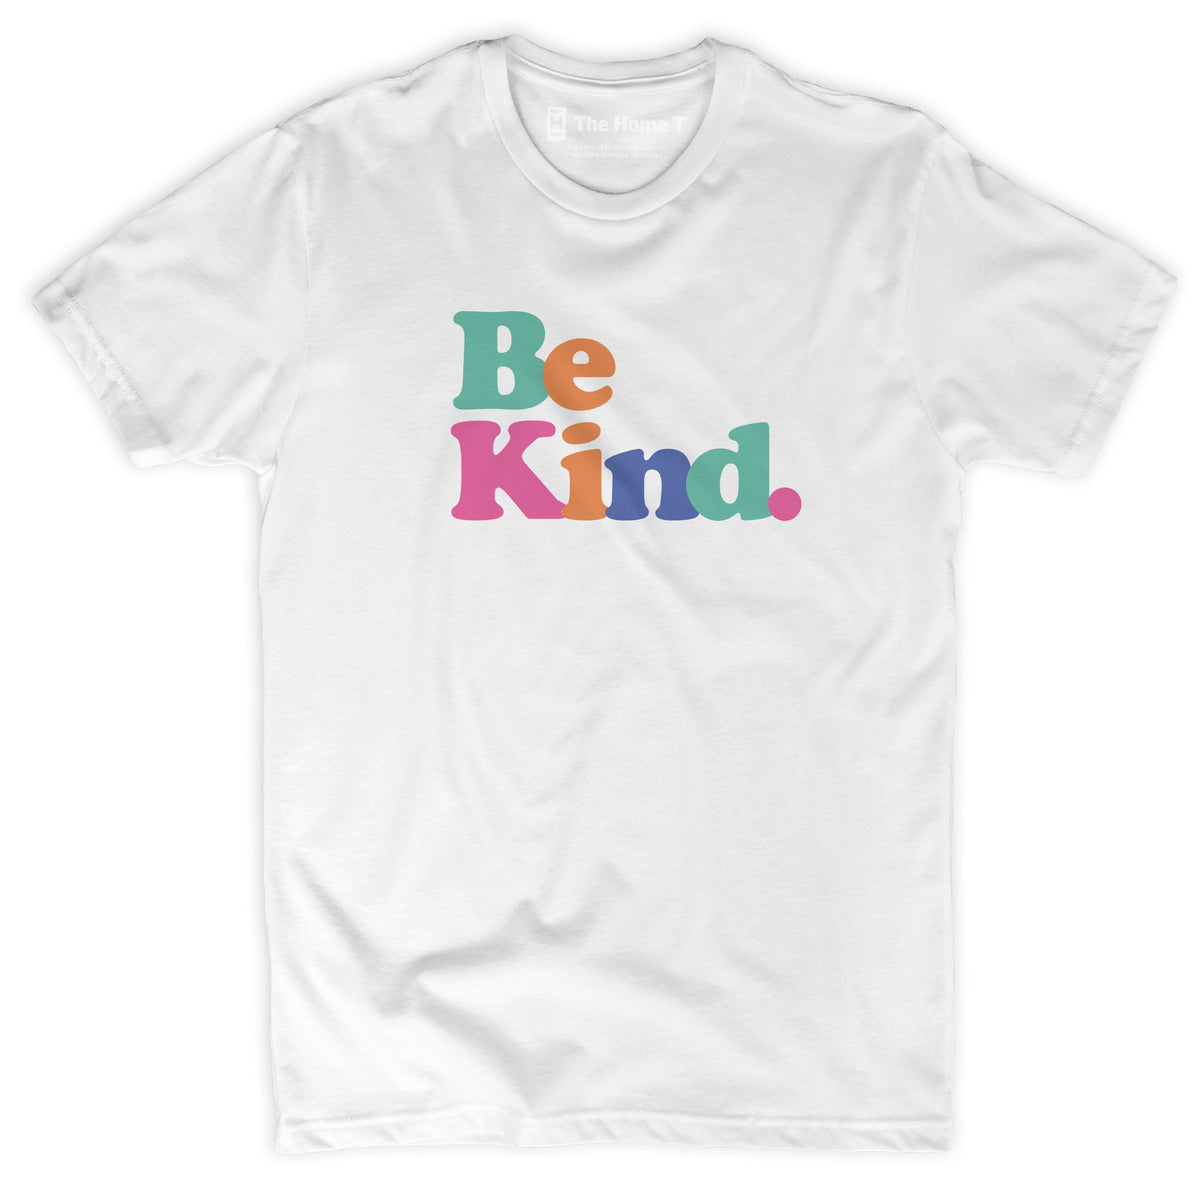 Be Kind - Colorful